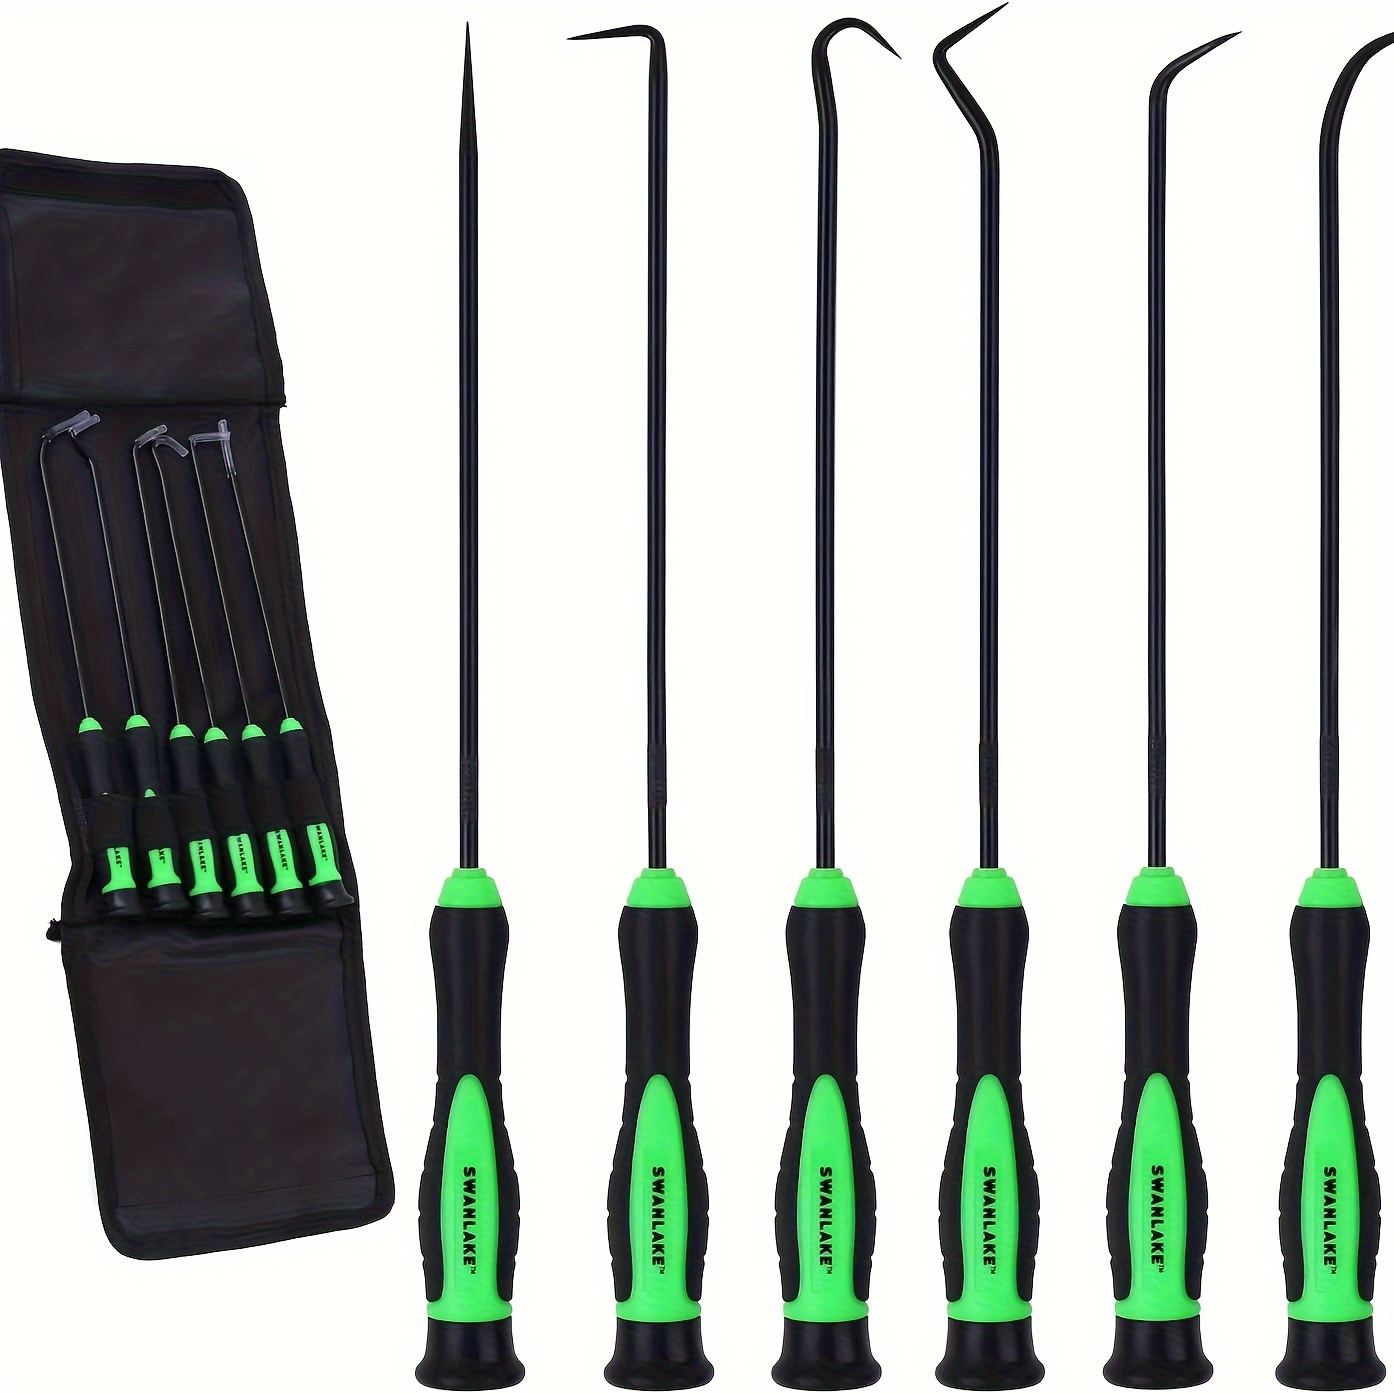 

Swanlake 6-piece Auto Oil Seal & O-ring Gasket Pick Set With Mini Hook Puller - S2 Steel, Grass Green/black